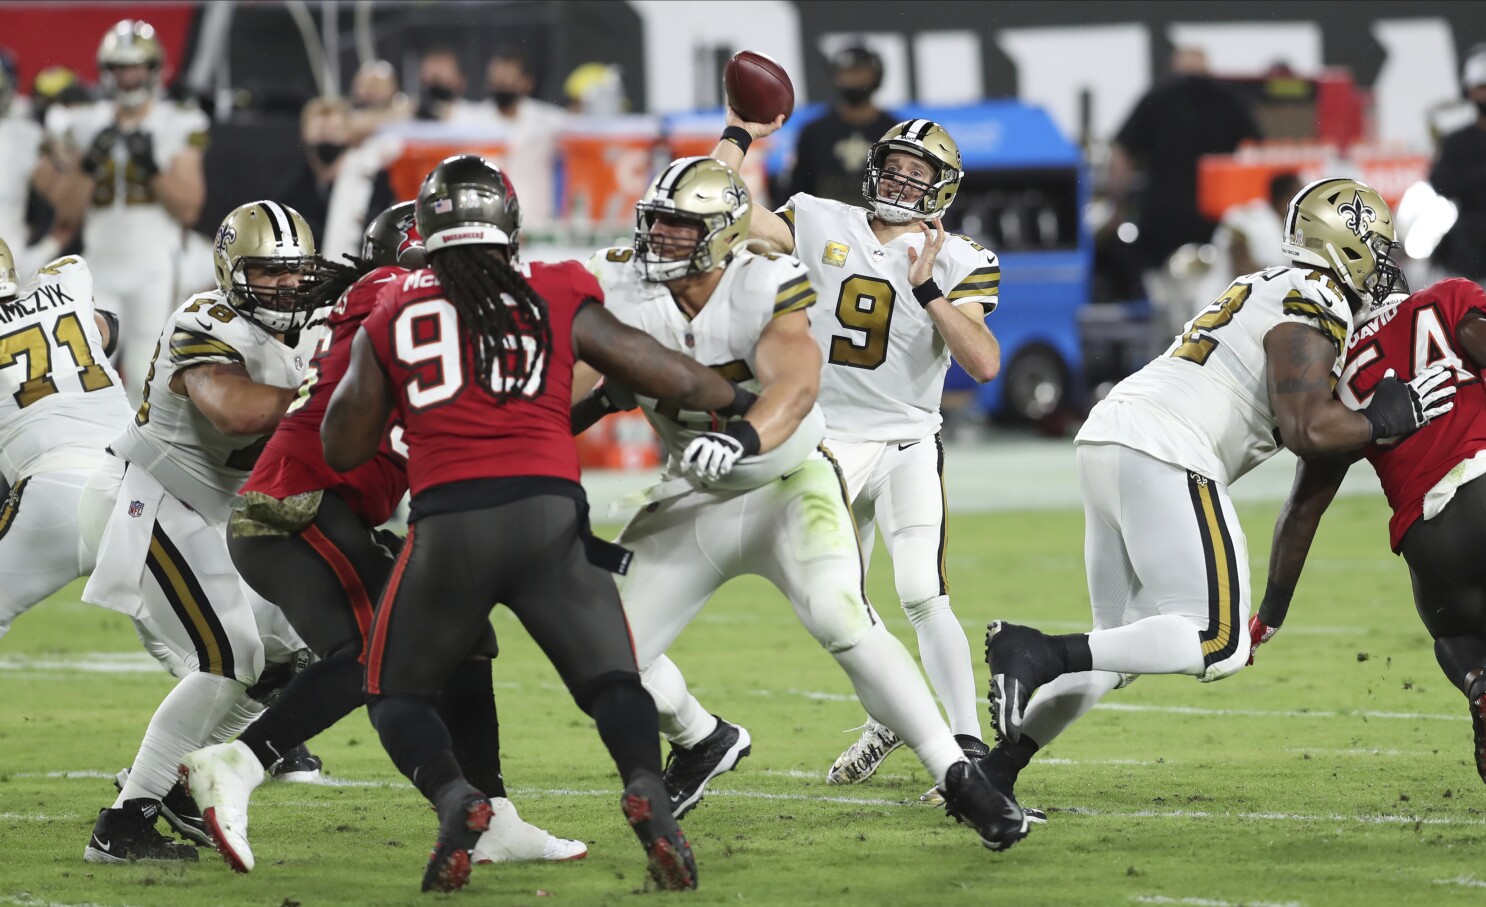 Drew Brees and Saints rout Tom Brady and Bucs 38-3 - Los Angeles Times